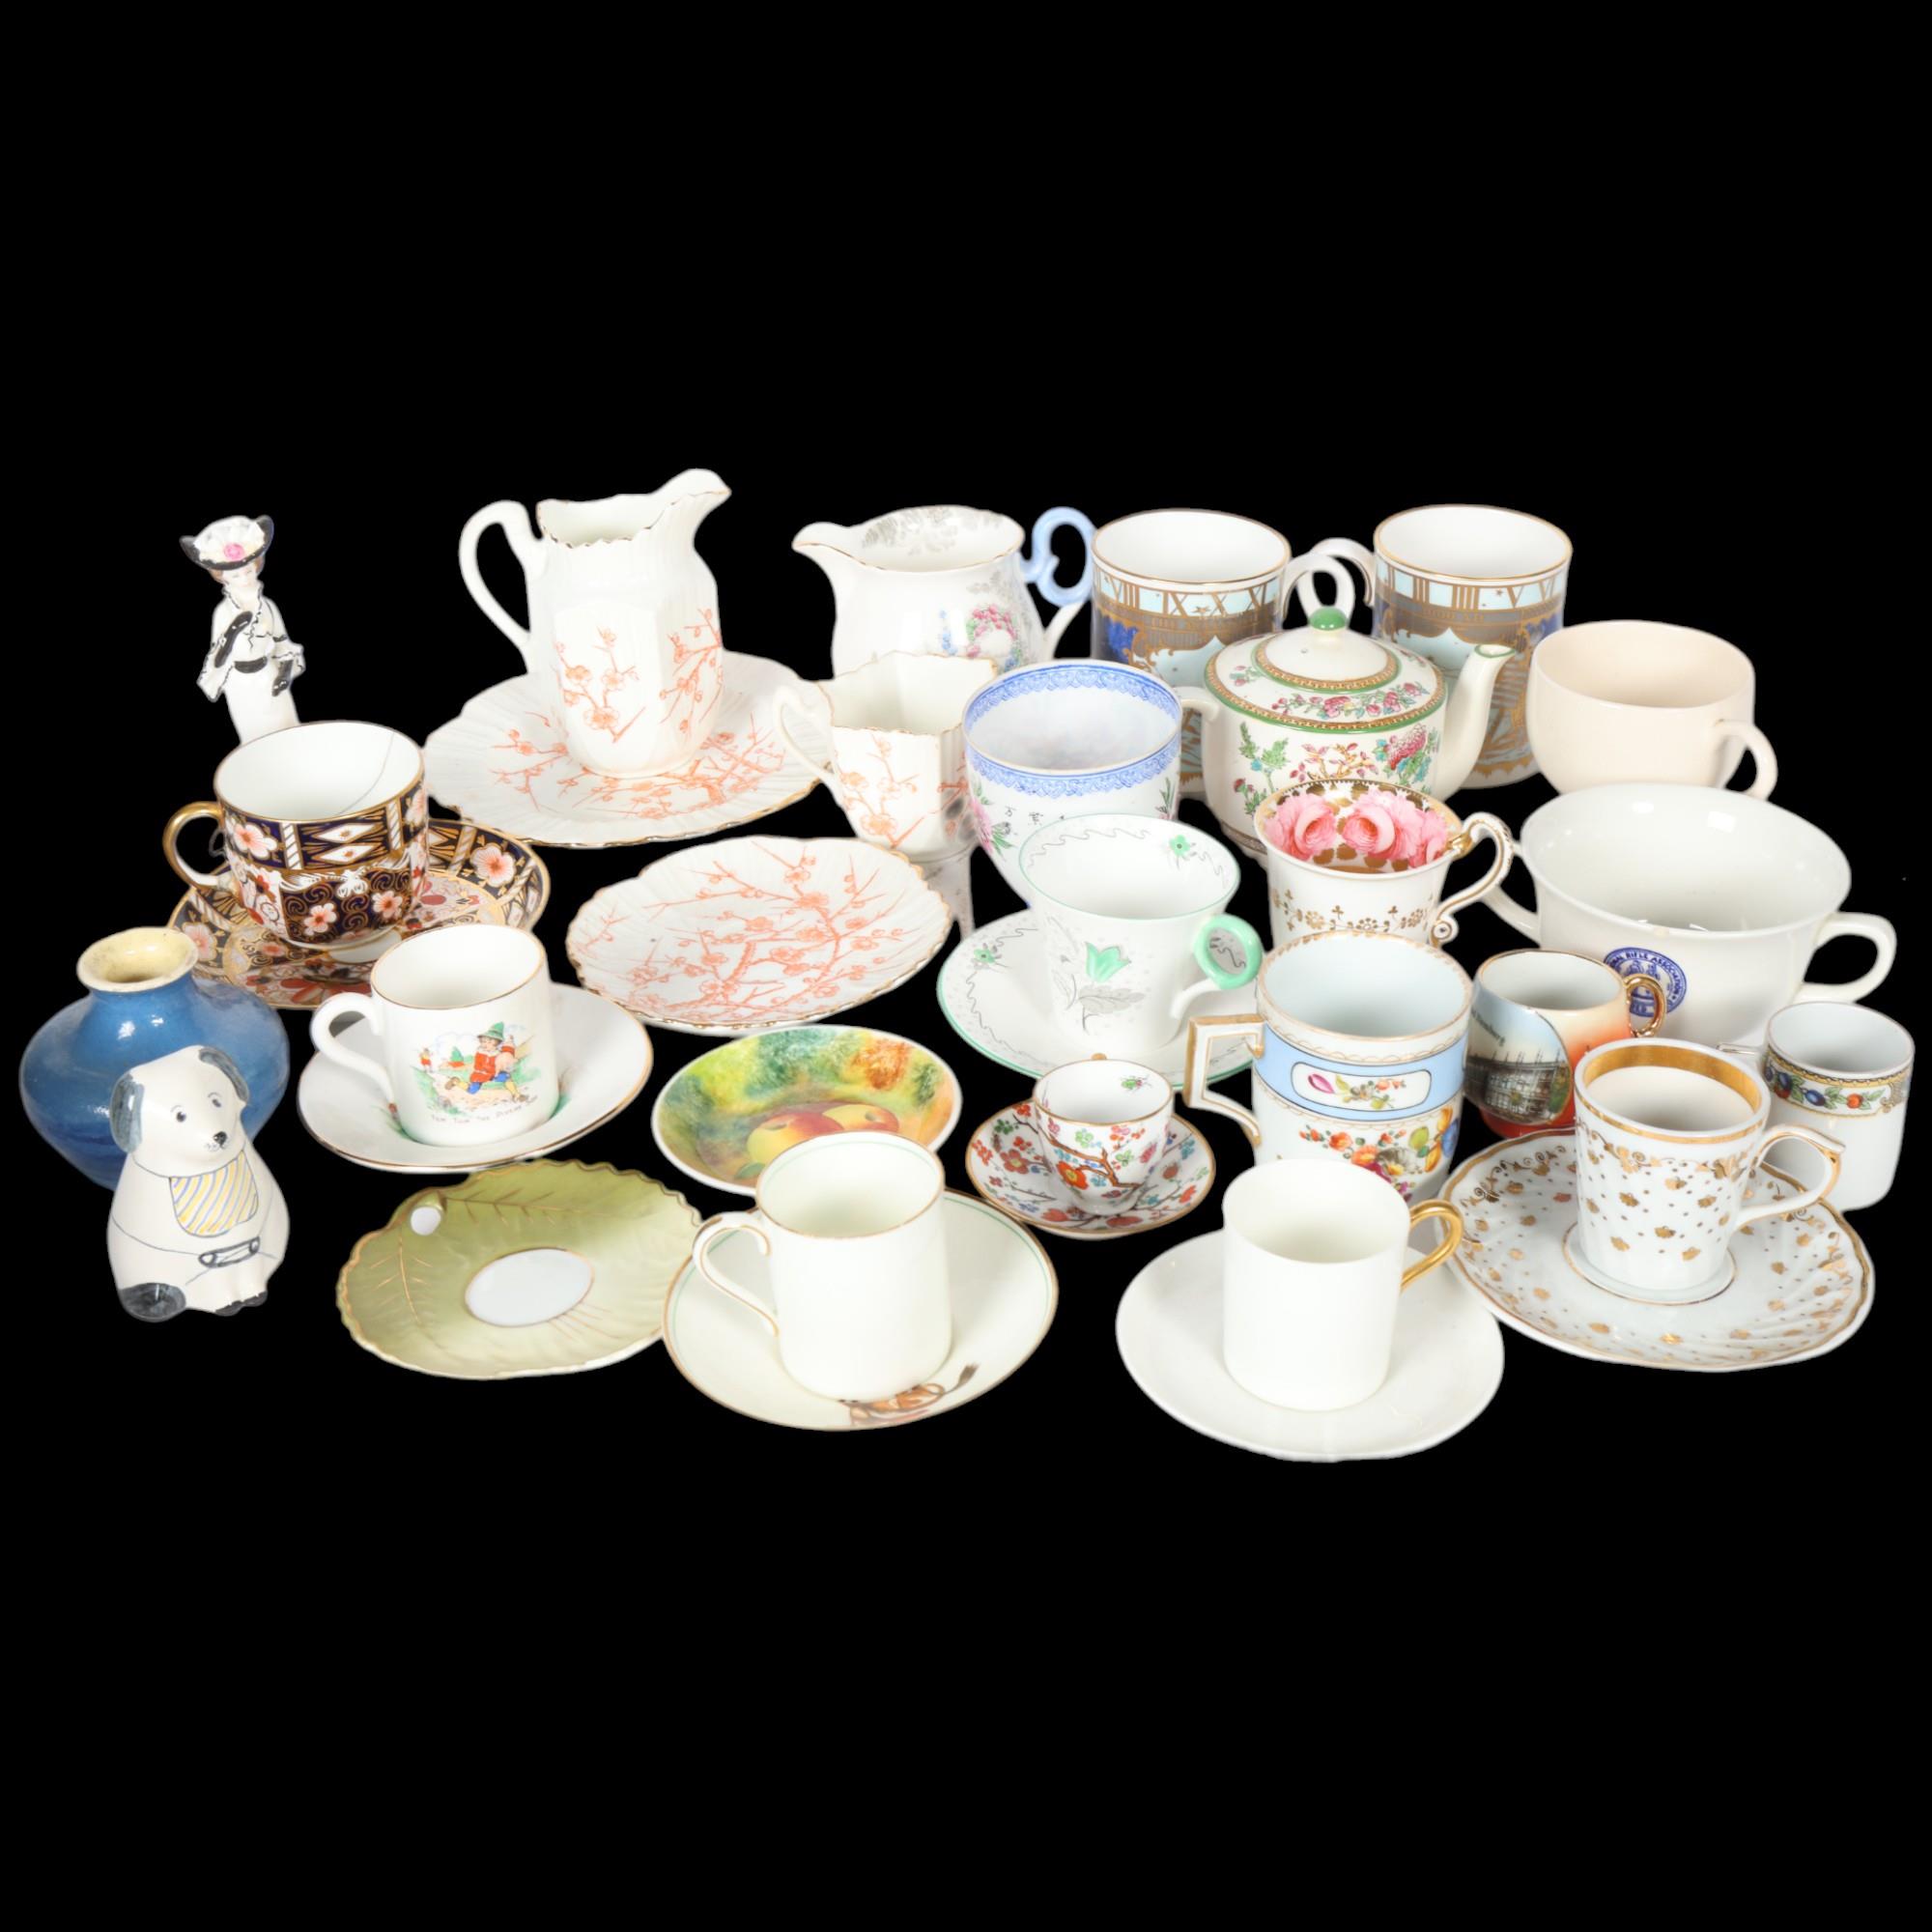 Rye dog, Carlton Ware cup, teapot, cabinet cups and saucers, etc